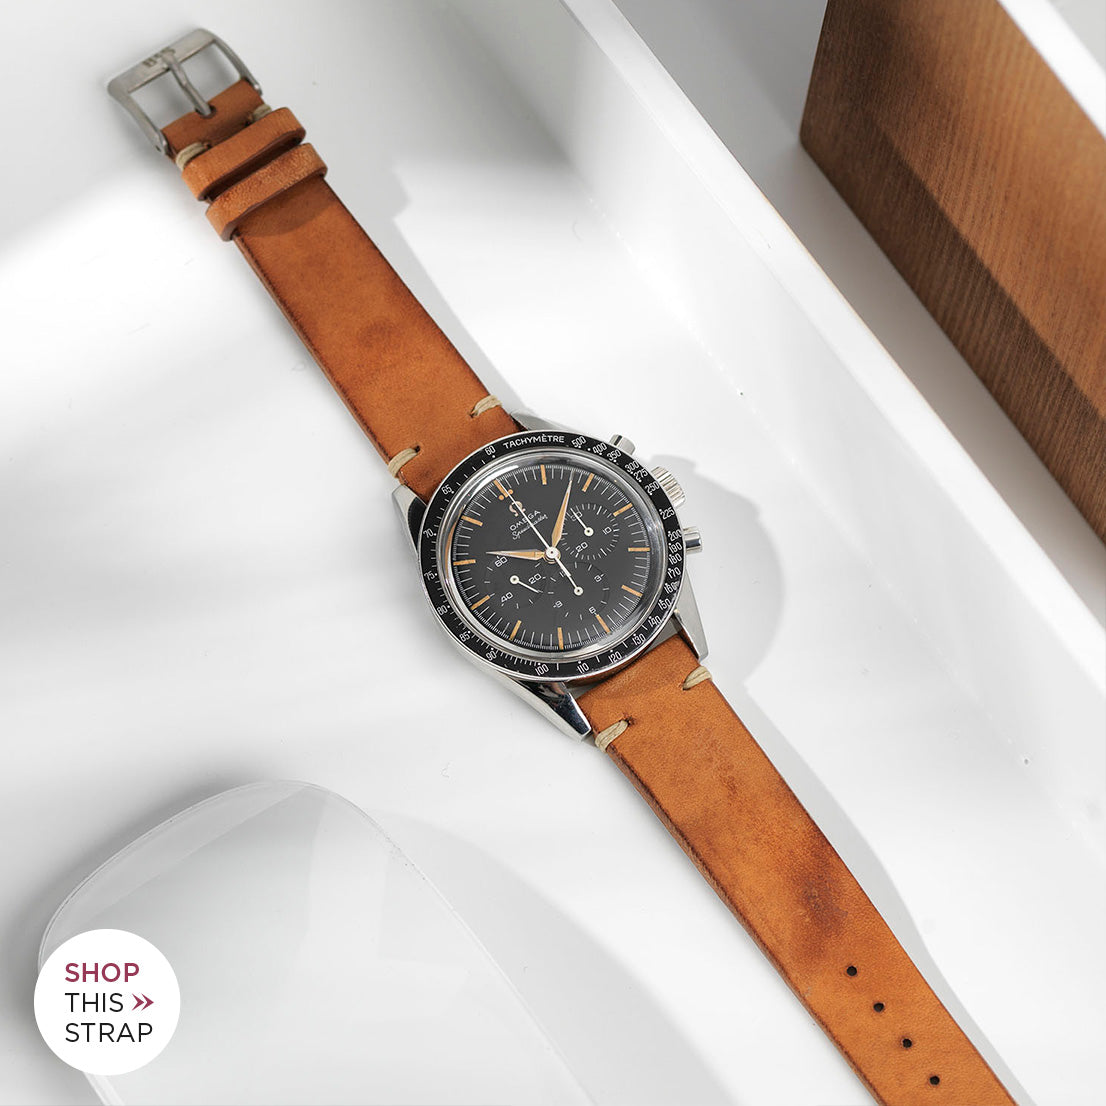 Bulang and Sons_Strap Guide_The Omega Straight Lugs speedmaster_Caramel Brown Leather Watch Strap